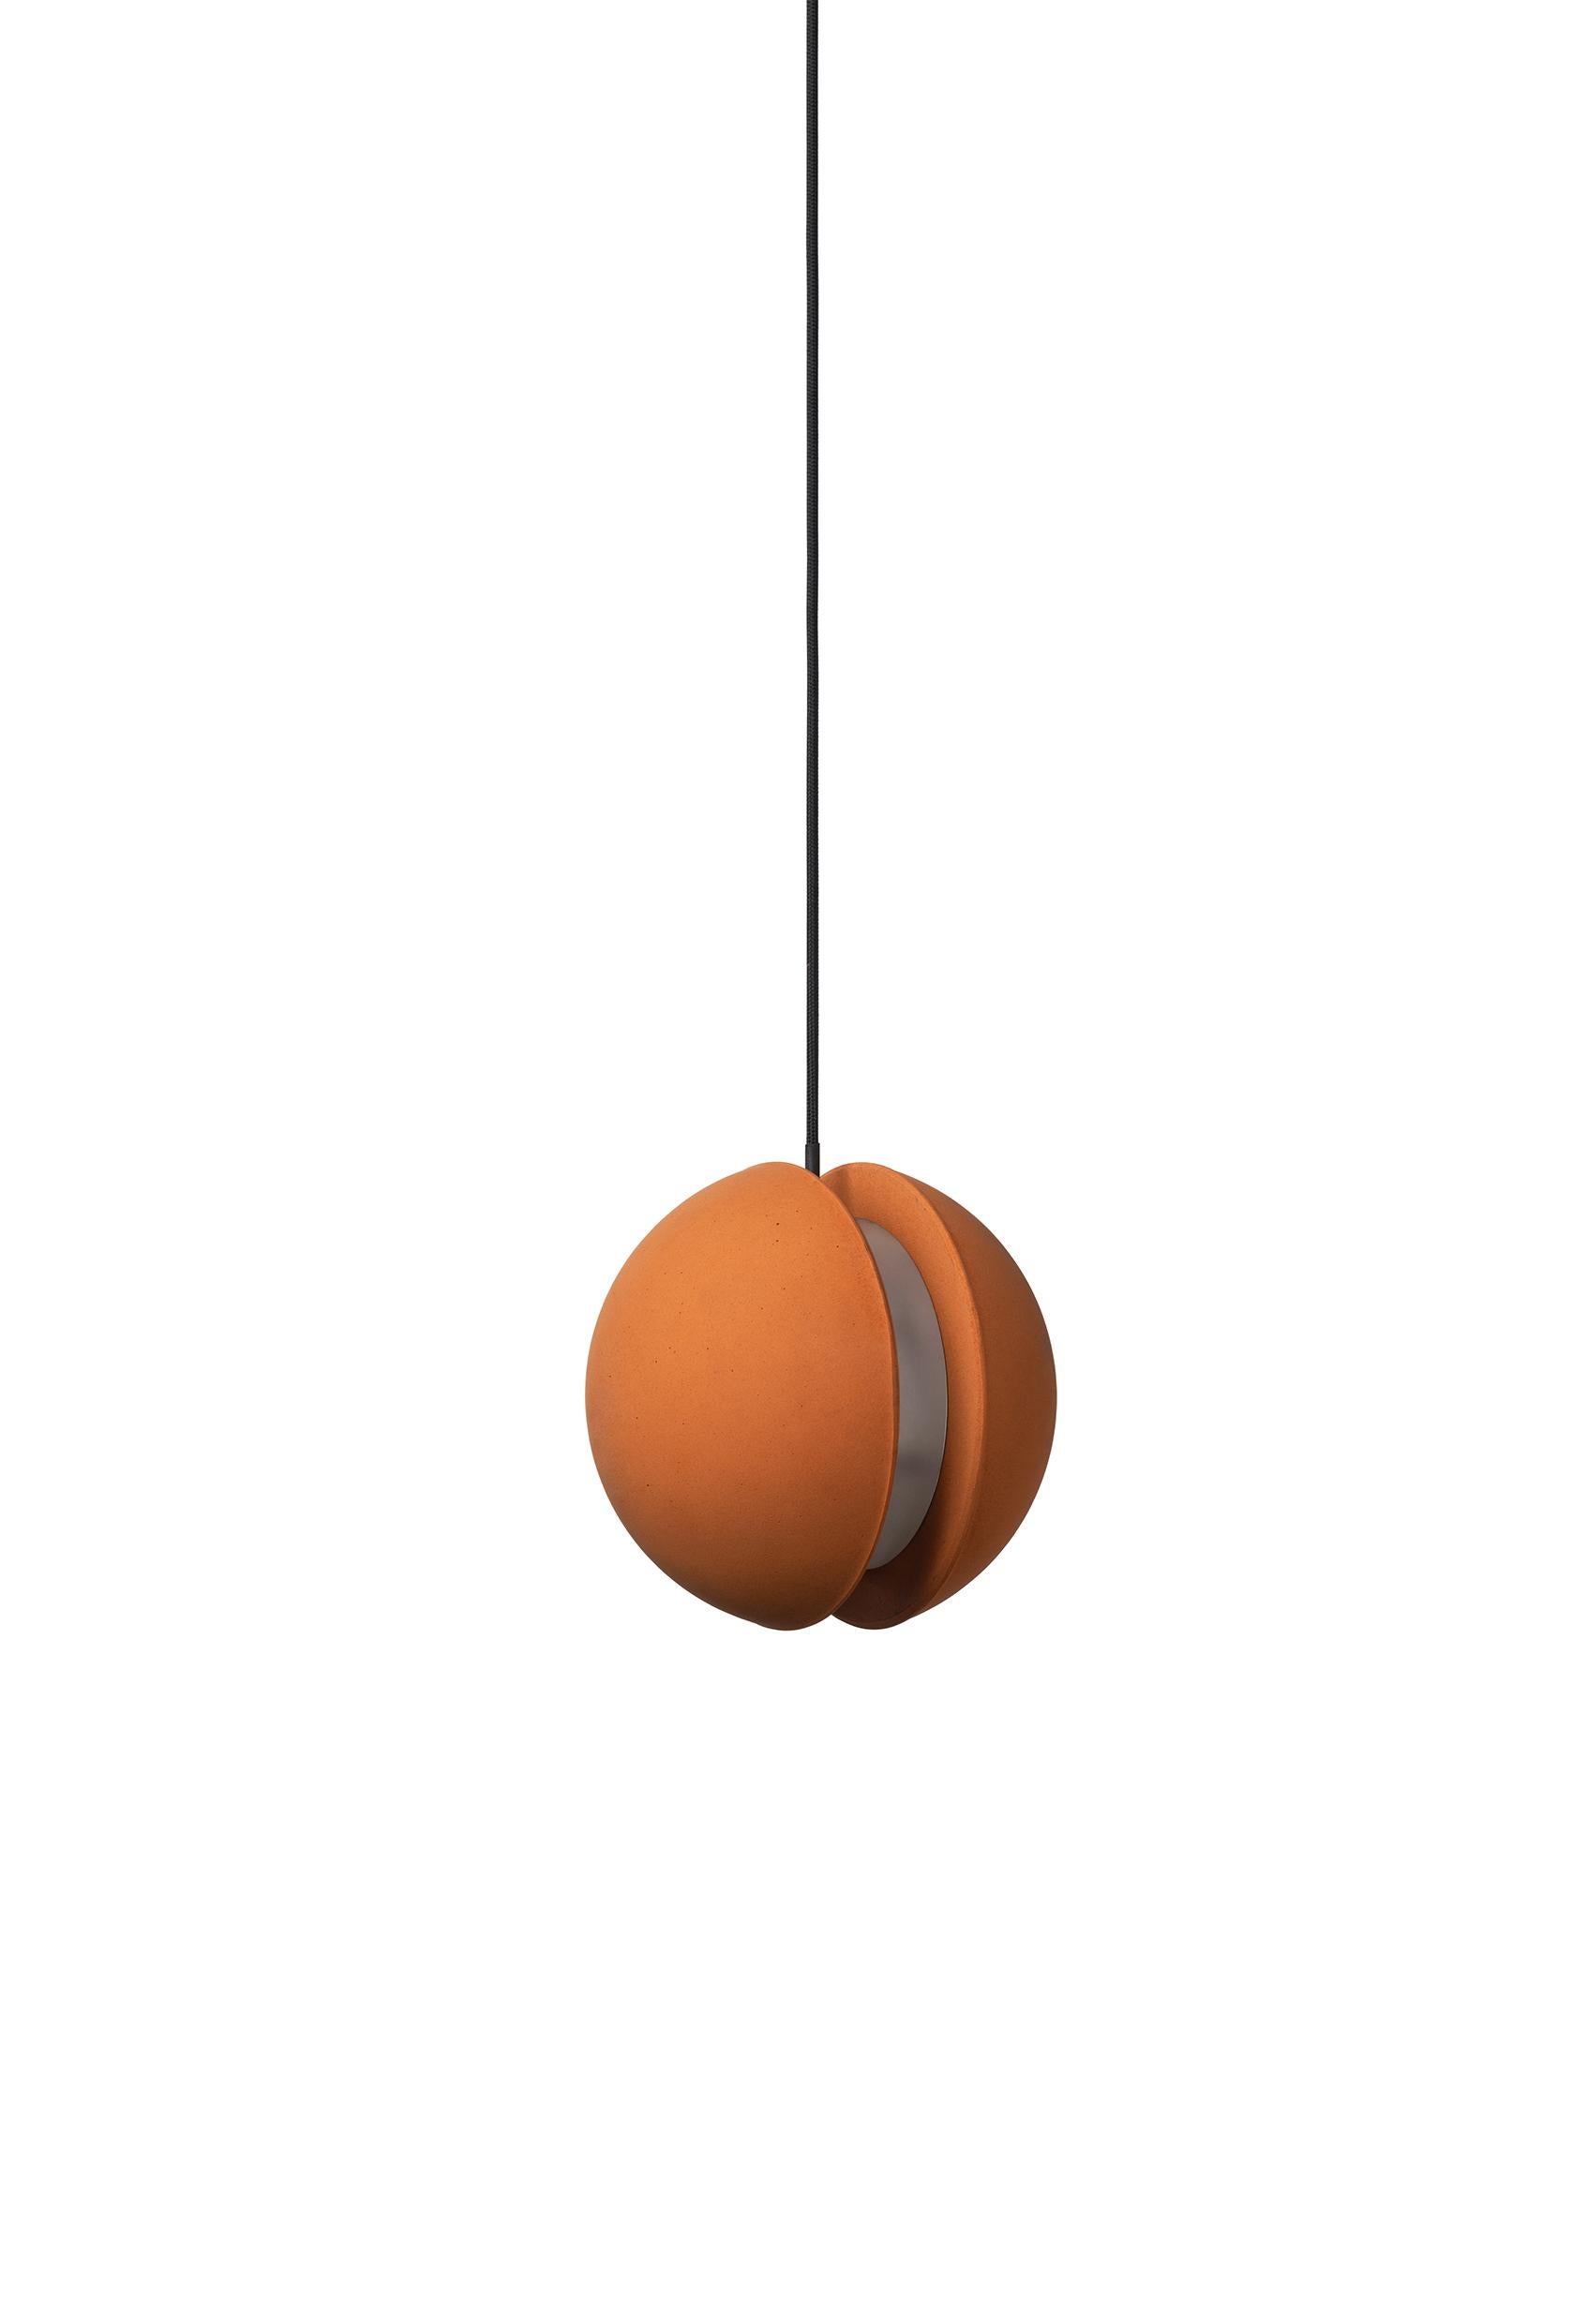 Pendant lamp 'E-mars' by Nongzao x Bentu Design.
Material: Terracotta 
Color: Earthy orange 

Measures: 12,7 cm high, 13 cm diameter
Wire: 3 meters (black)
Lamp type: AC 100-240V 50-60Hz  9W - Comptable with US electric system.

Variations:
- Color: